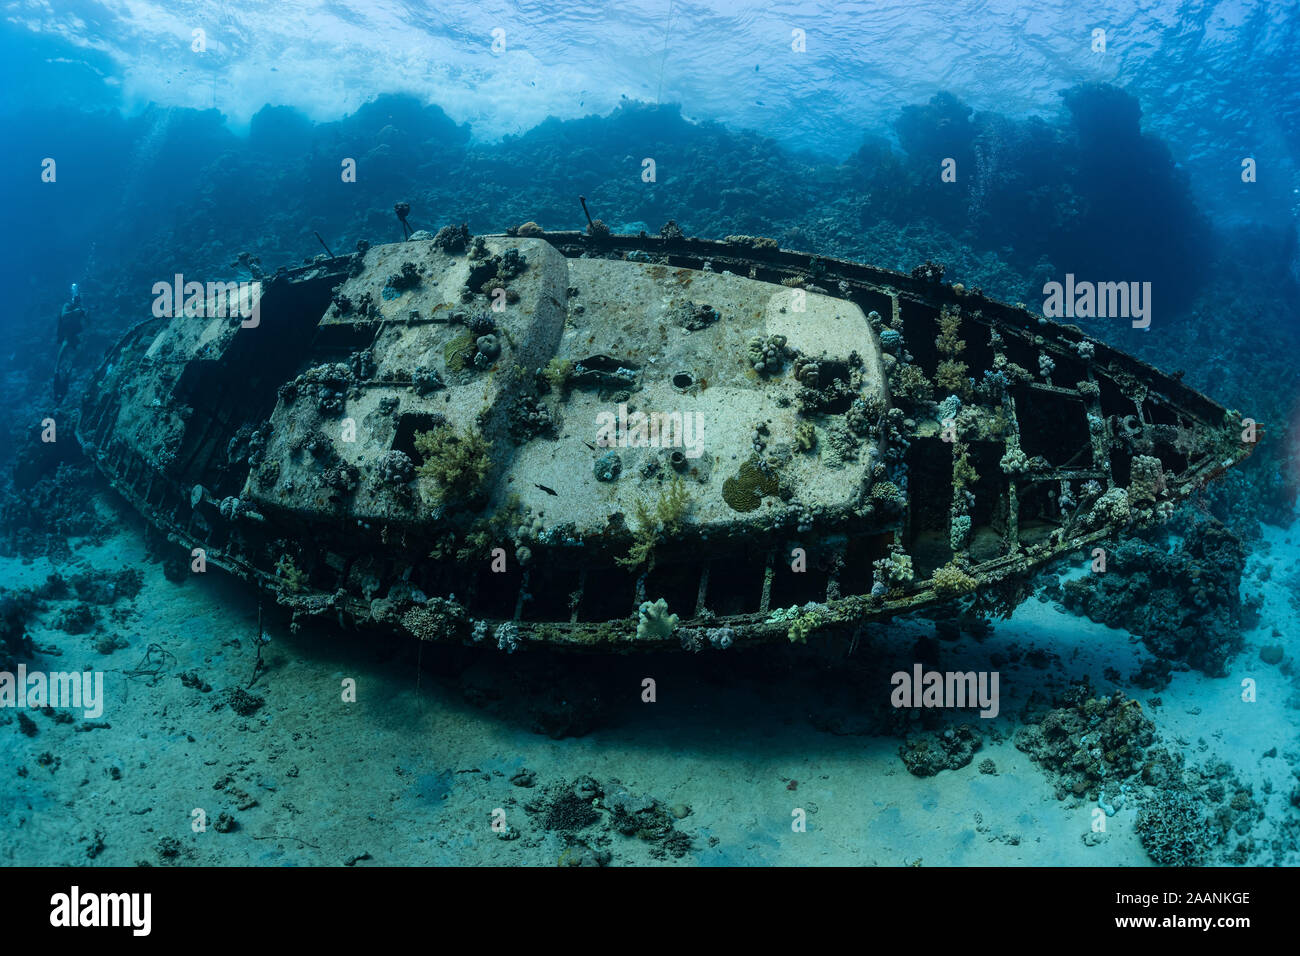 divers visiting an underwater wreck of a metal sailboat on a reef in the Rea Sea, Egypt Stock Photo